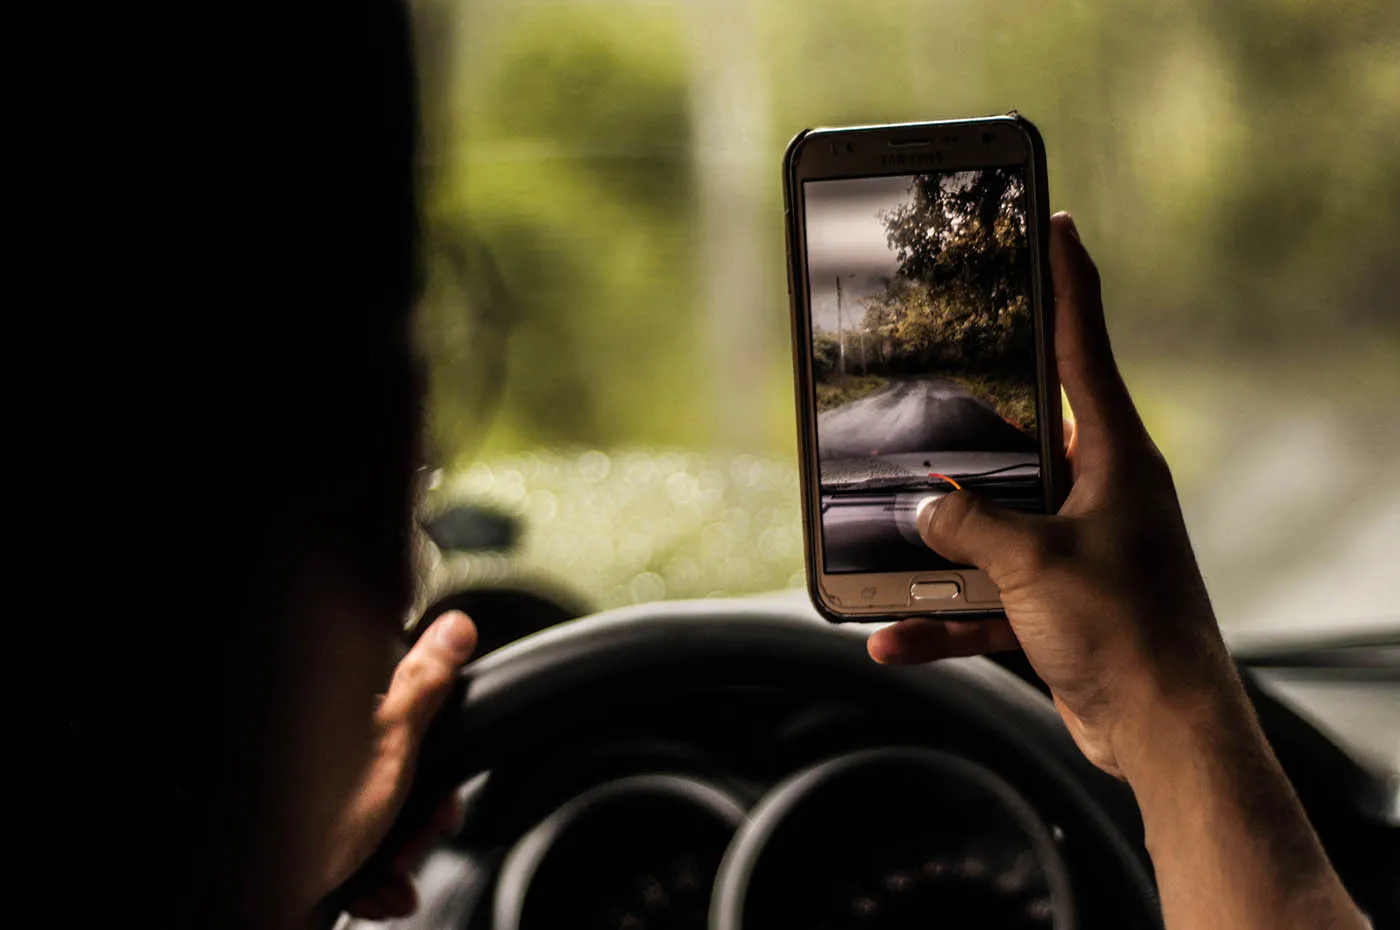 Road Trip Hashtags for Instagram & Twitter - List of the best road trip hashtags to use when sharing photos to social media sites like Instagram or Twitter. Get your photos found or browse pics.